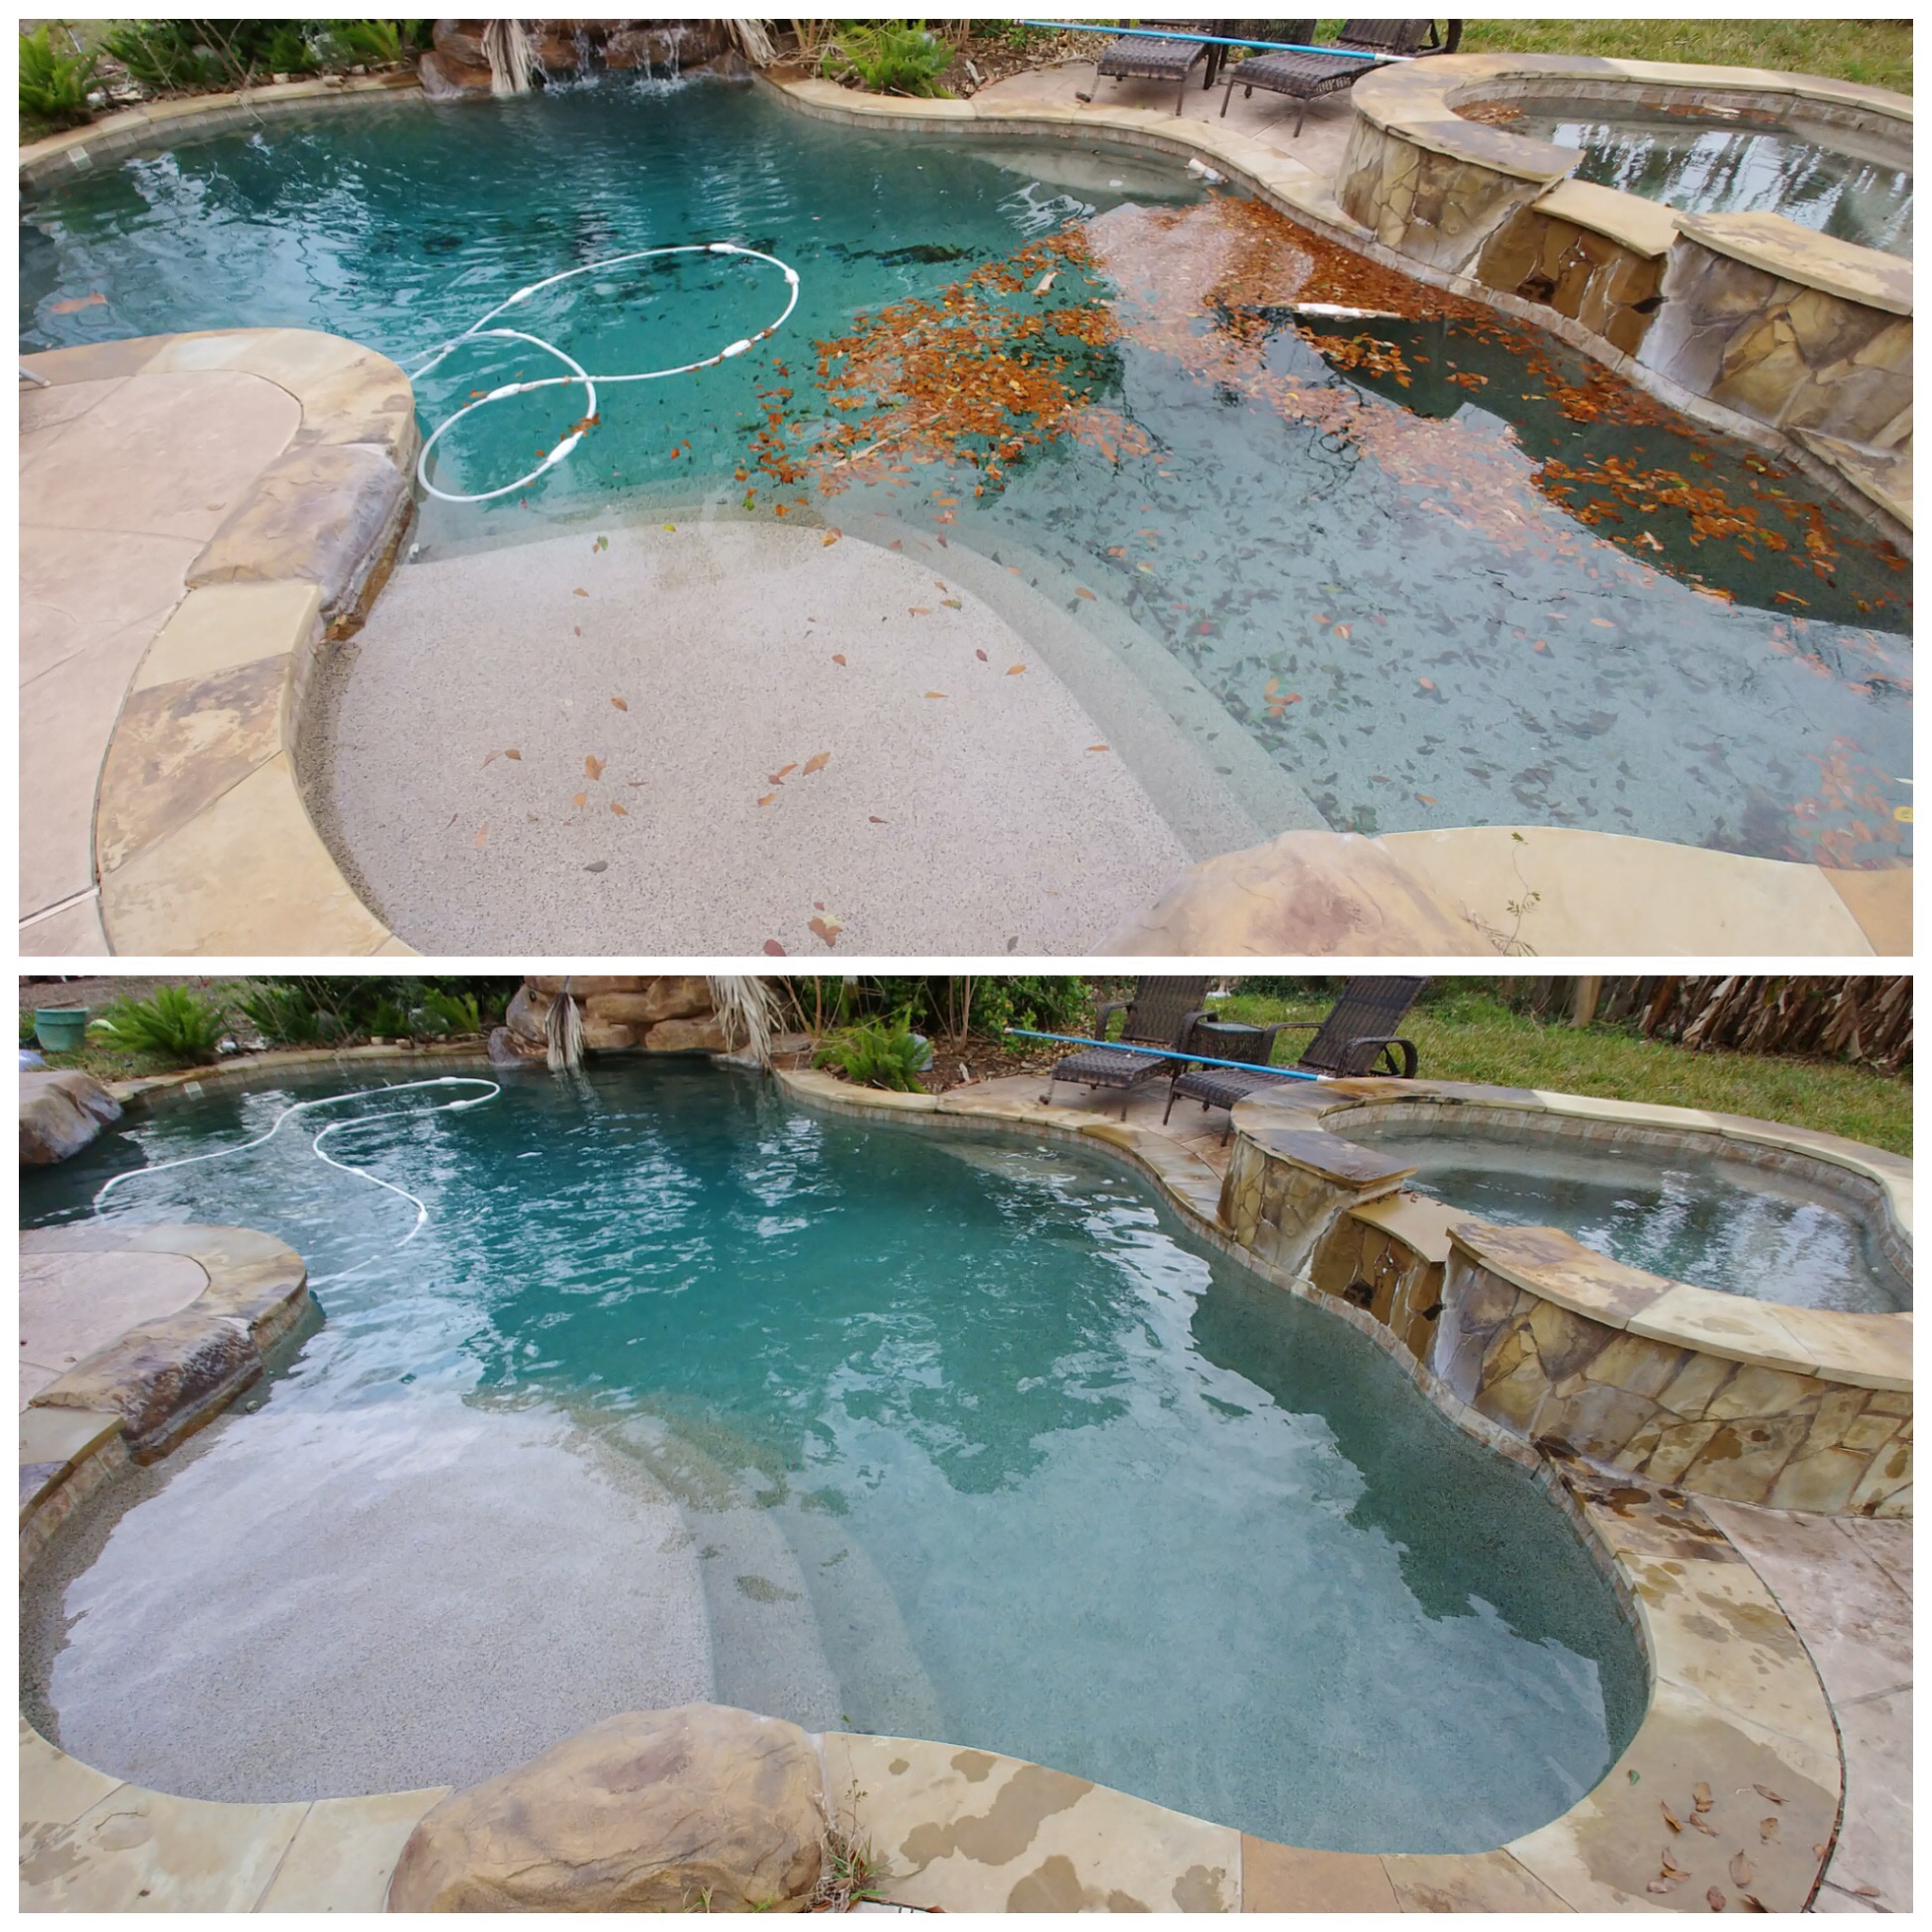 Before and after images from a swimming pool cleaning